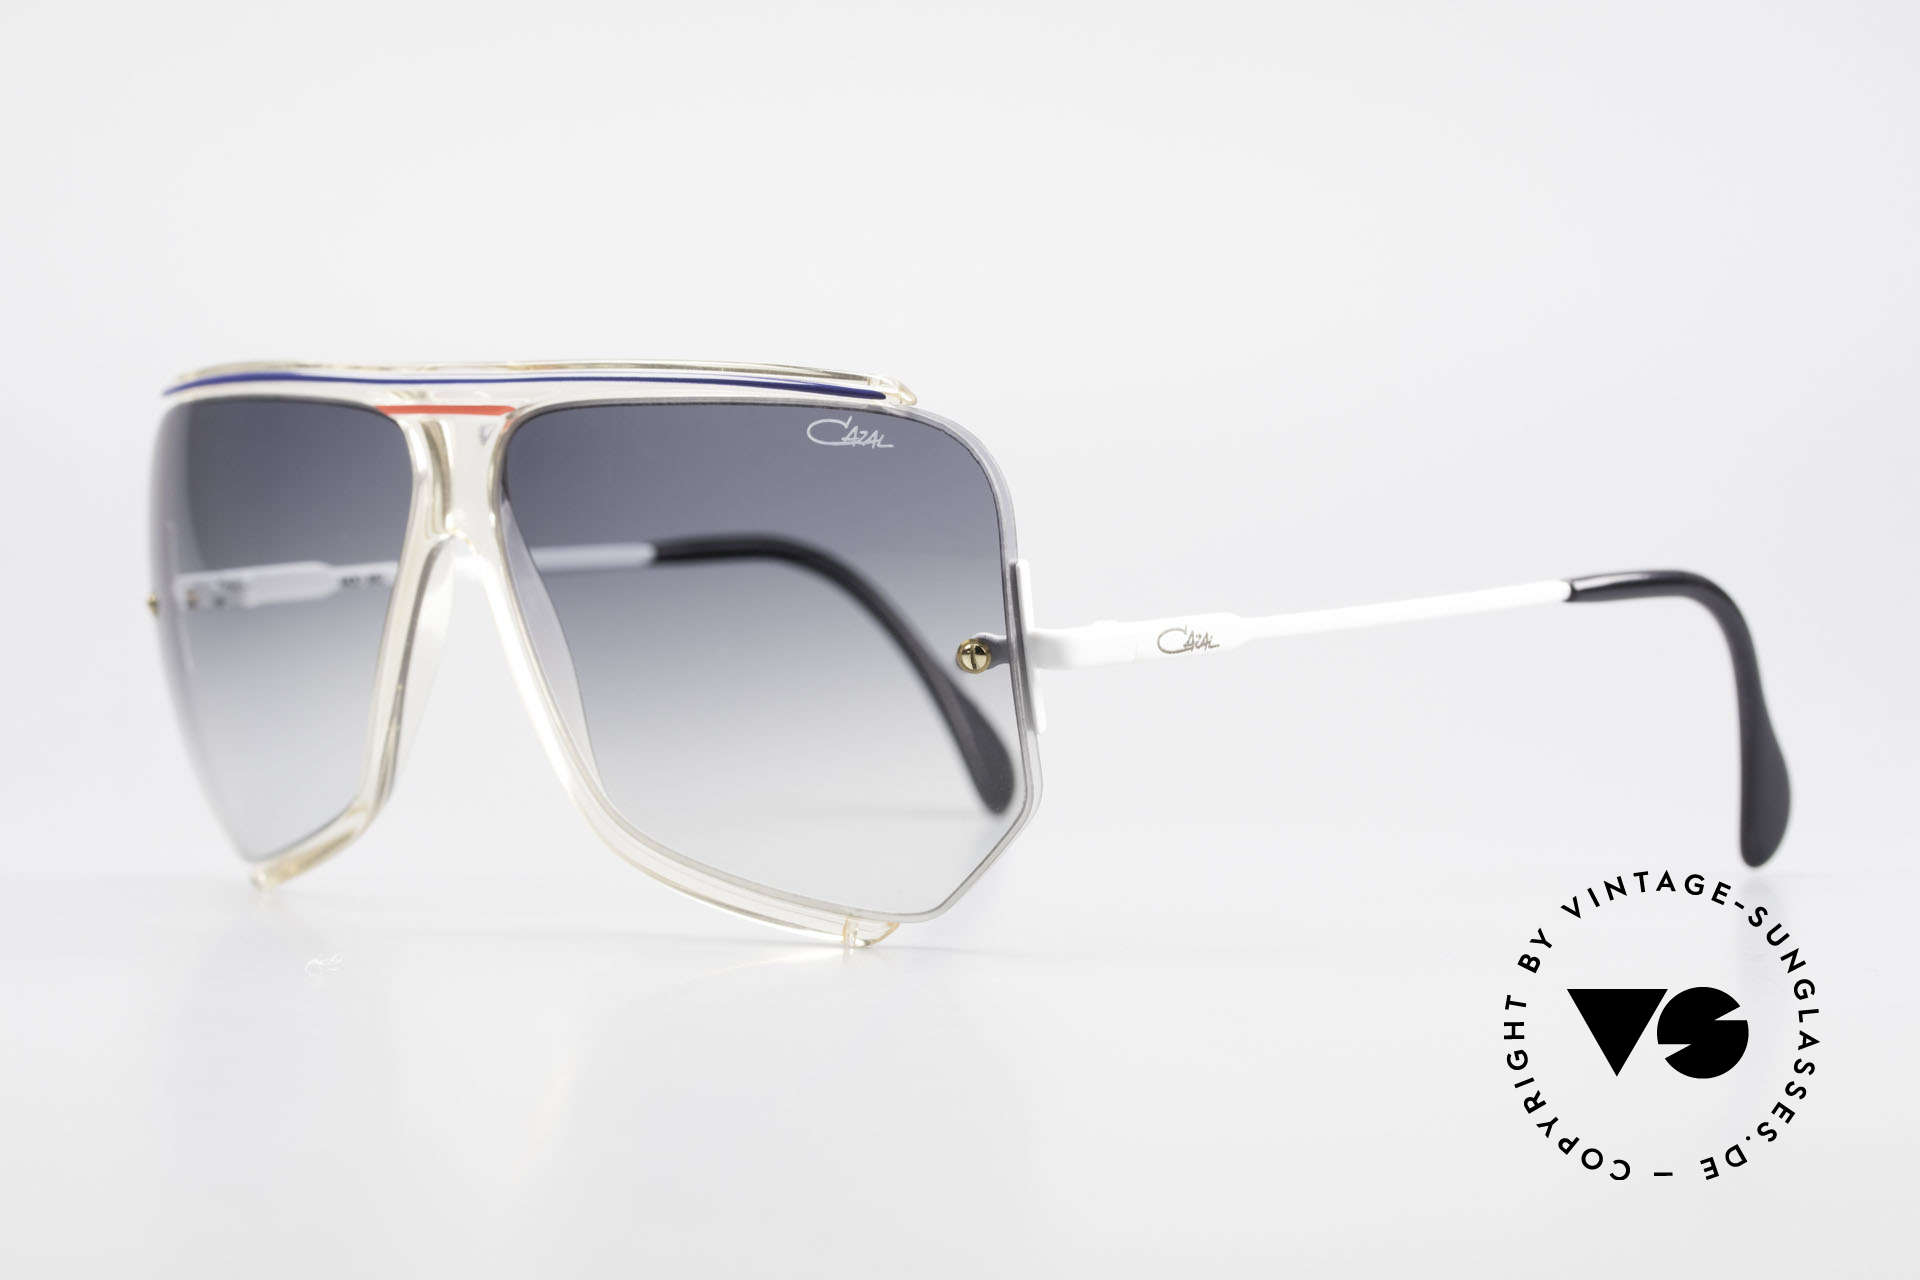 Cazal 850 Old School 80's Sunglasses, most wanted vintage Cazal designer sunglasses, Made for Men